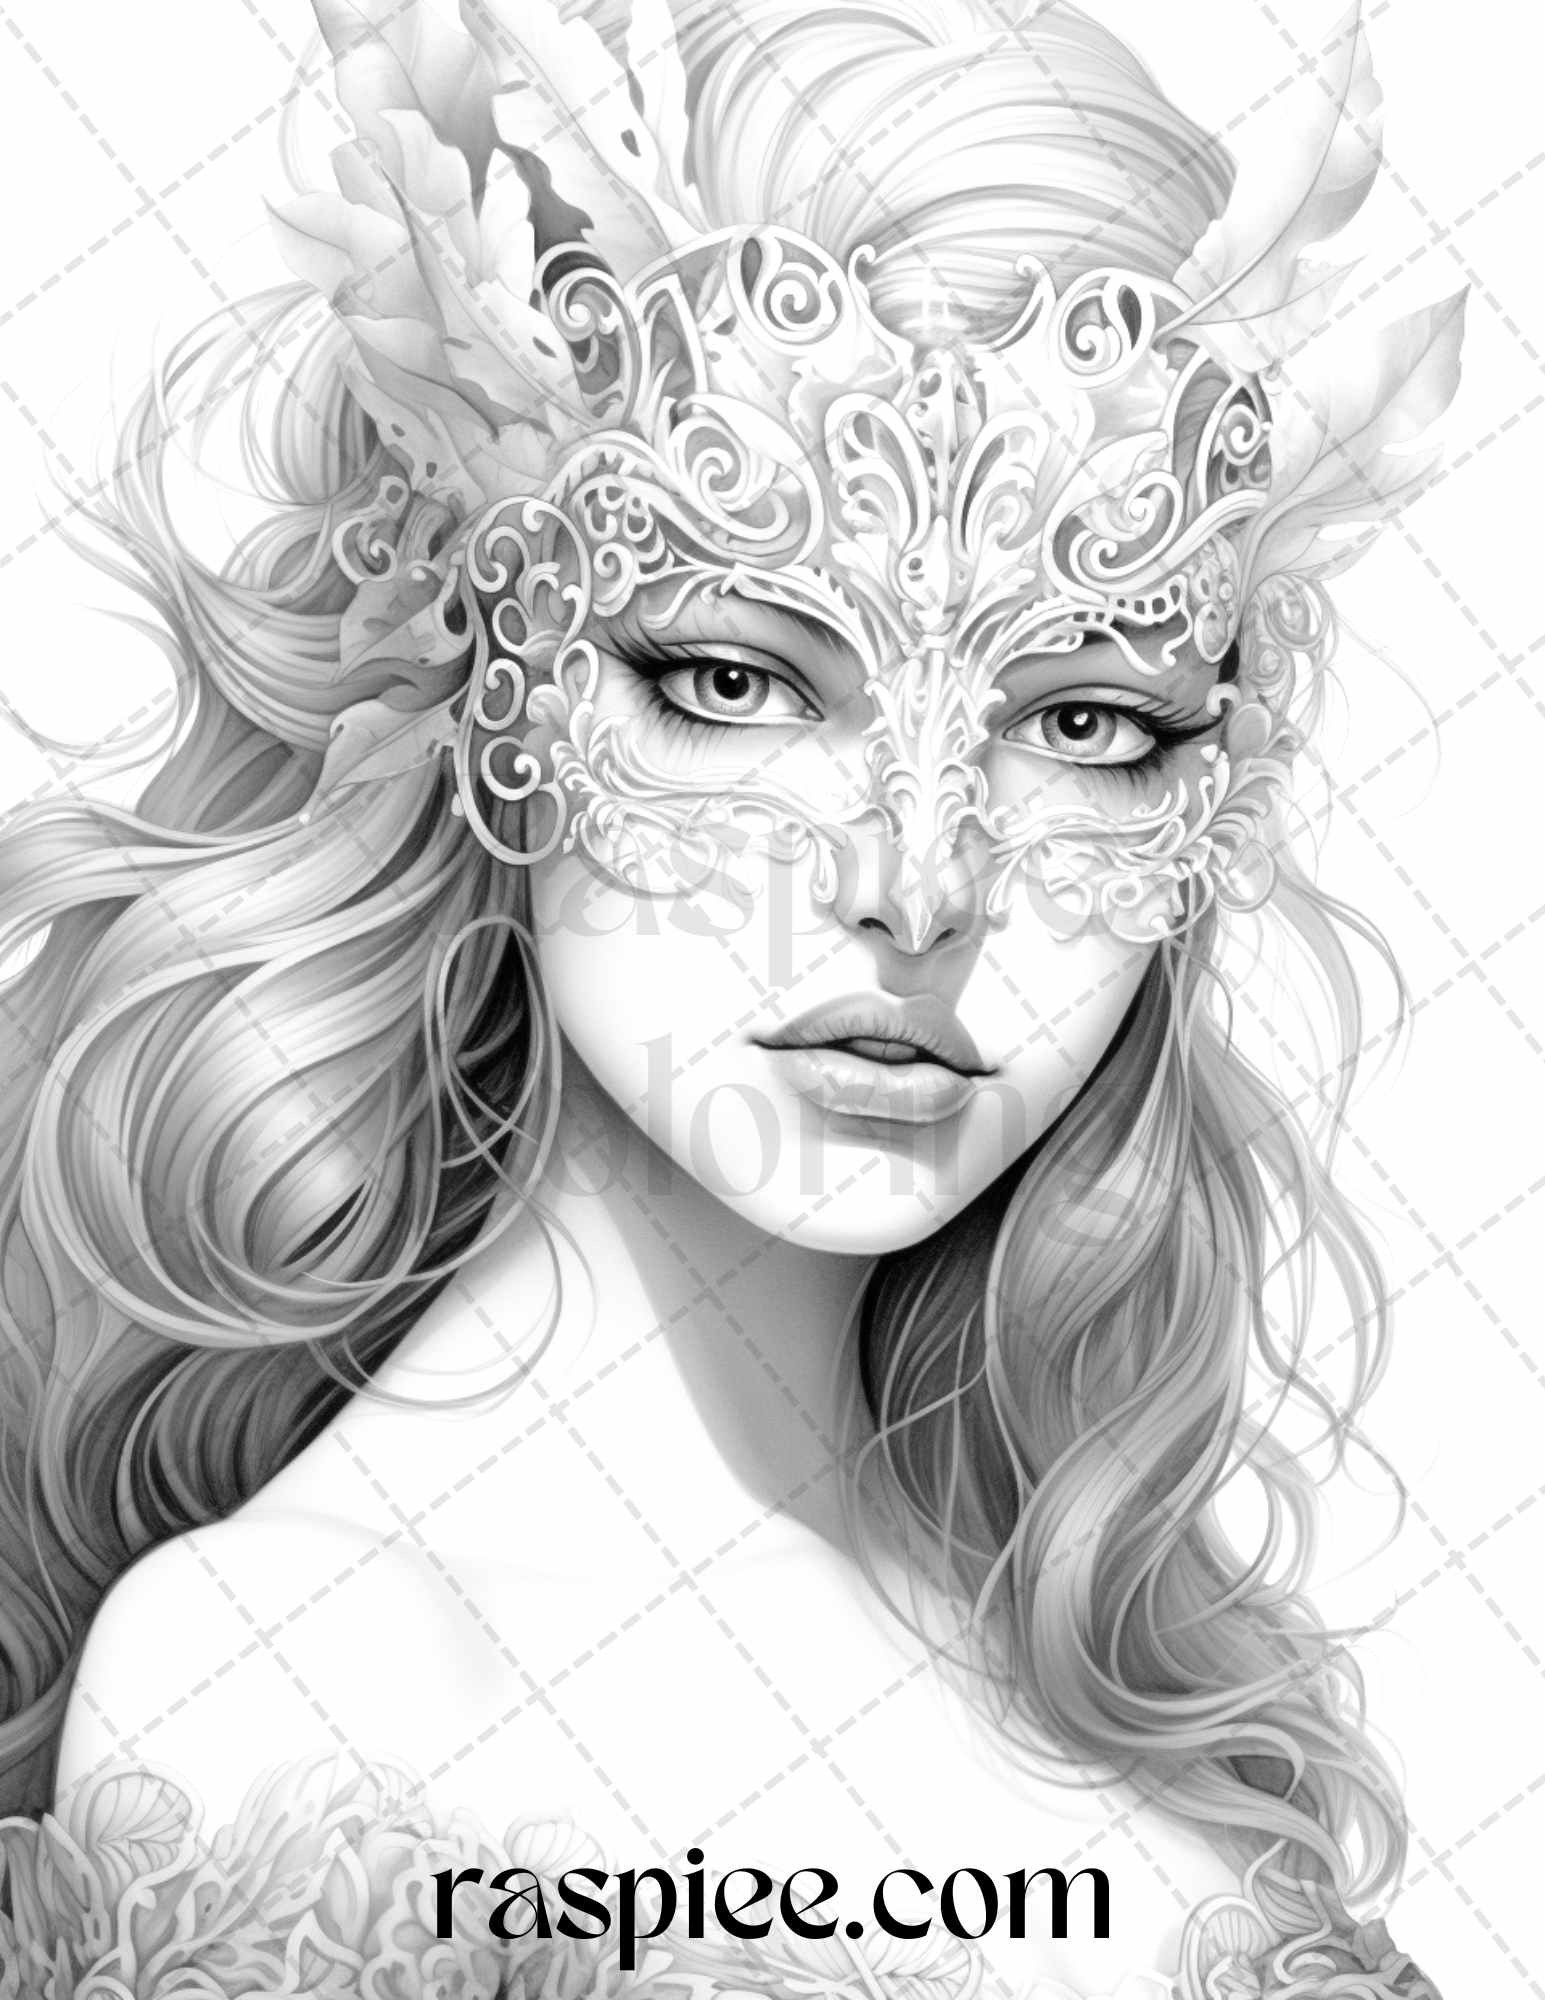 40 Masquerade Girls Grayscale Coloring Pages Printable for Adults, PDF File Instant Download - raspiee